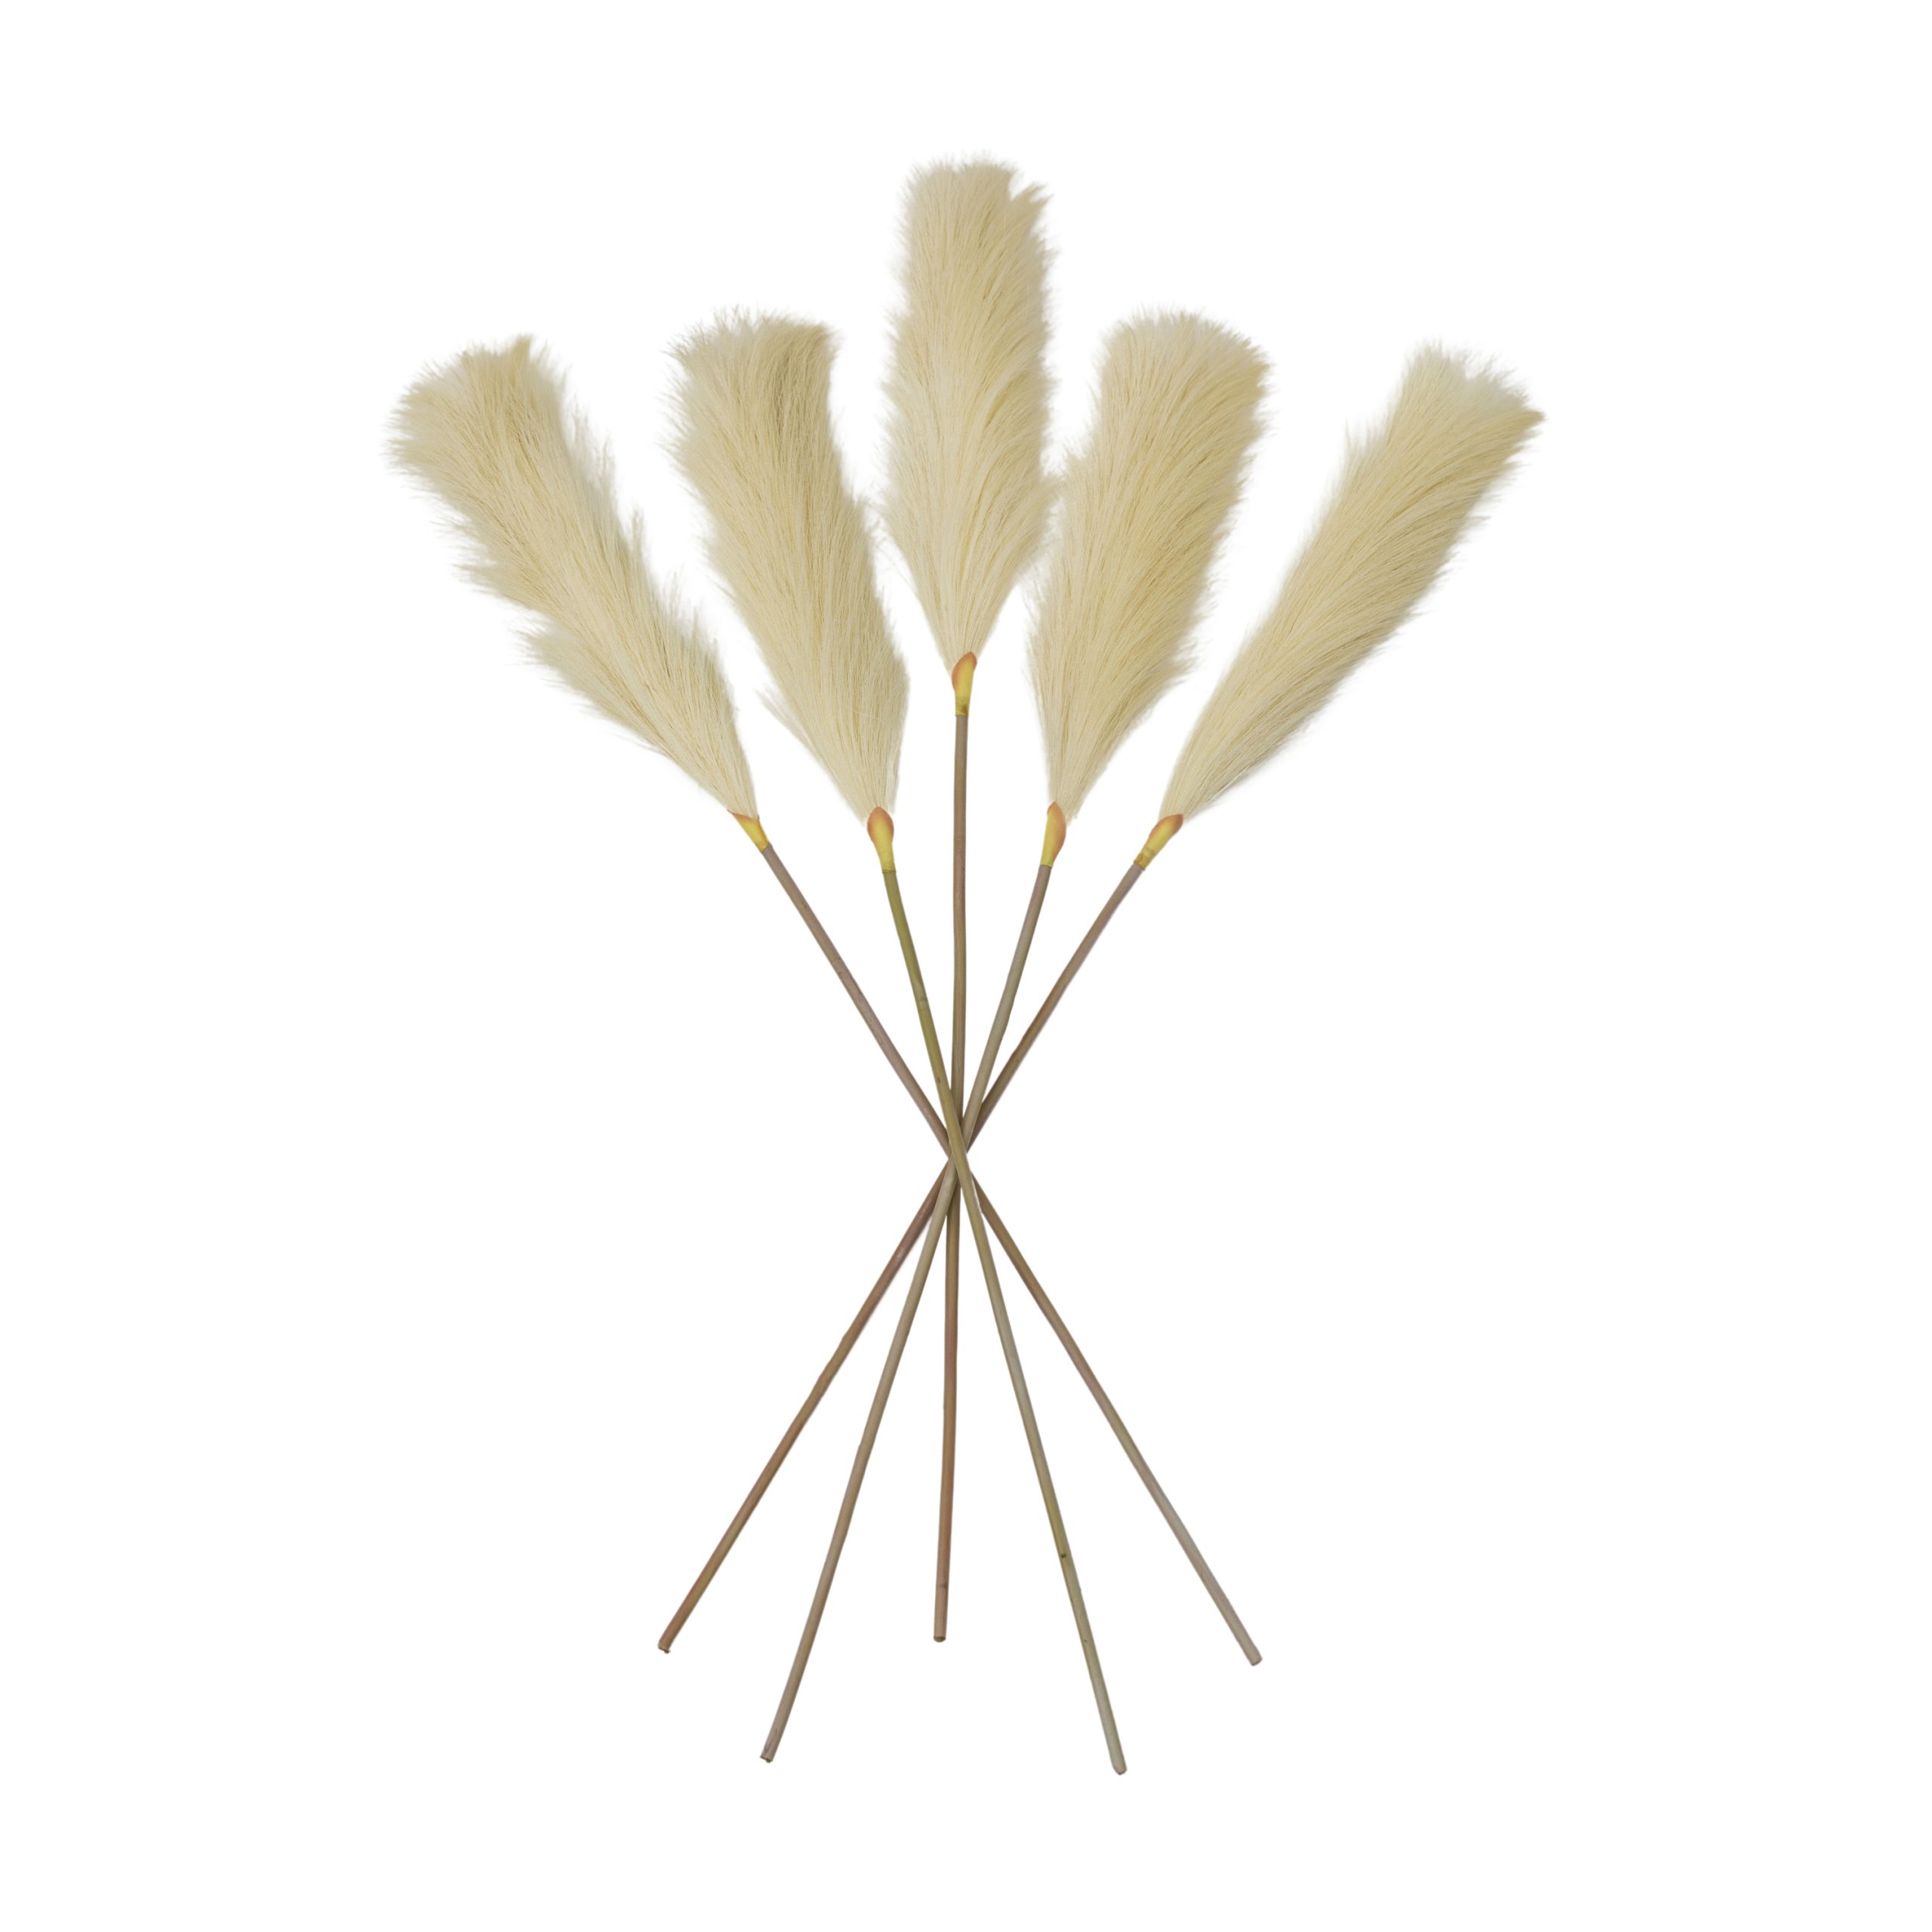 Gallery Direct Goma Soft Feather Stem Ivory (5pk)